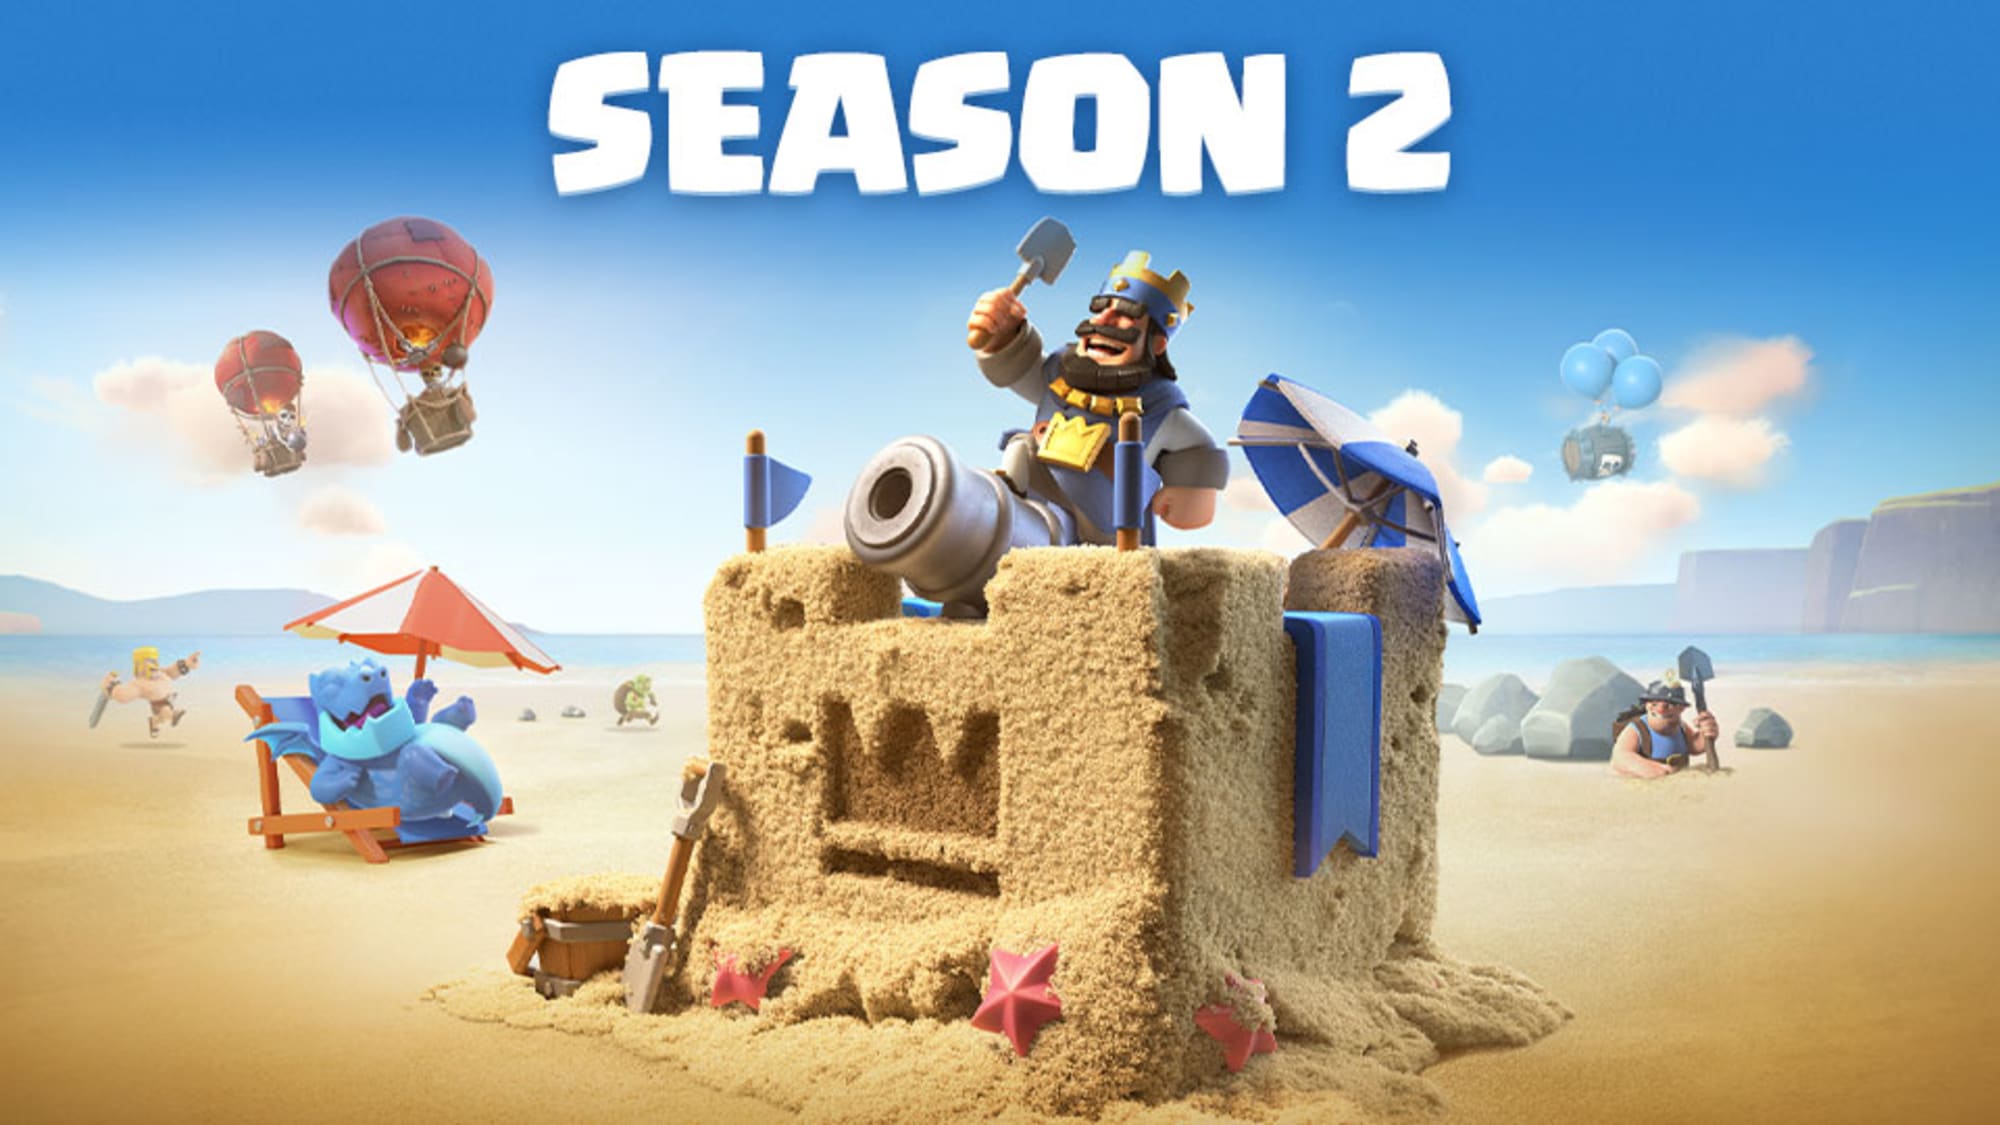 Clash Royale Season 2 lands with new round of buffs and nerfs